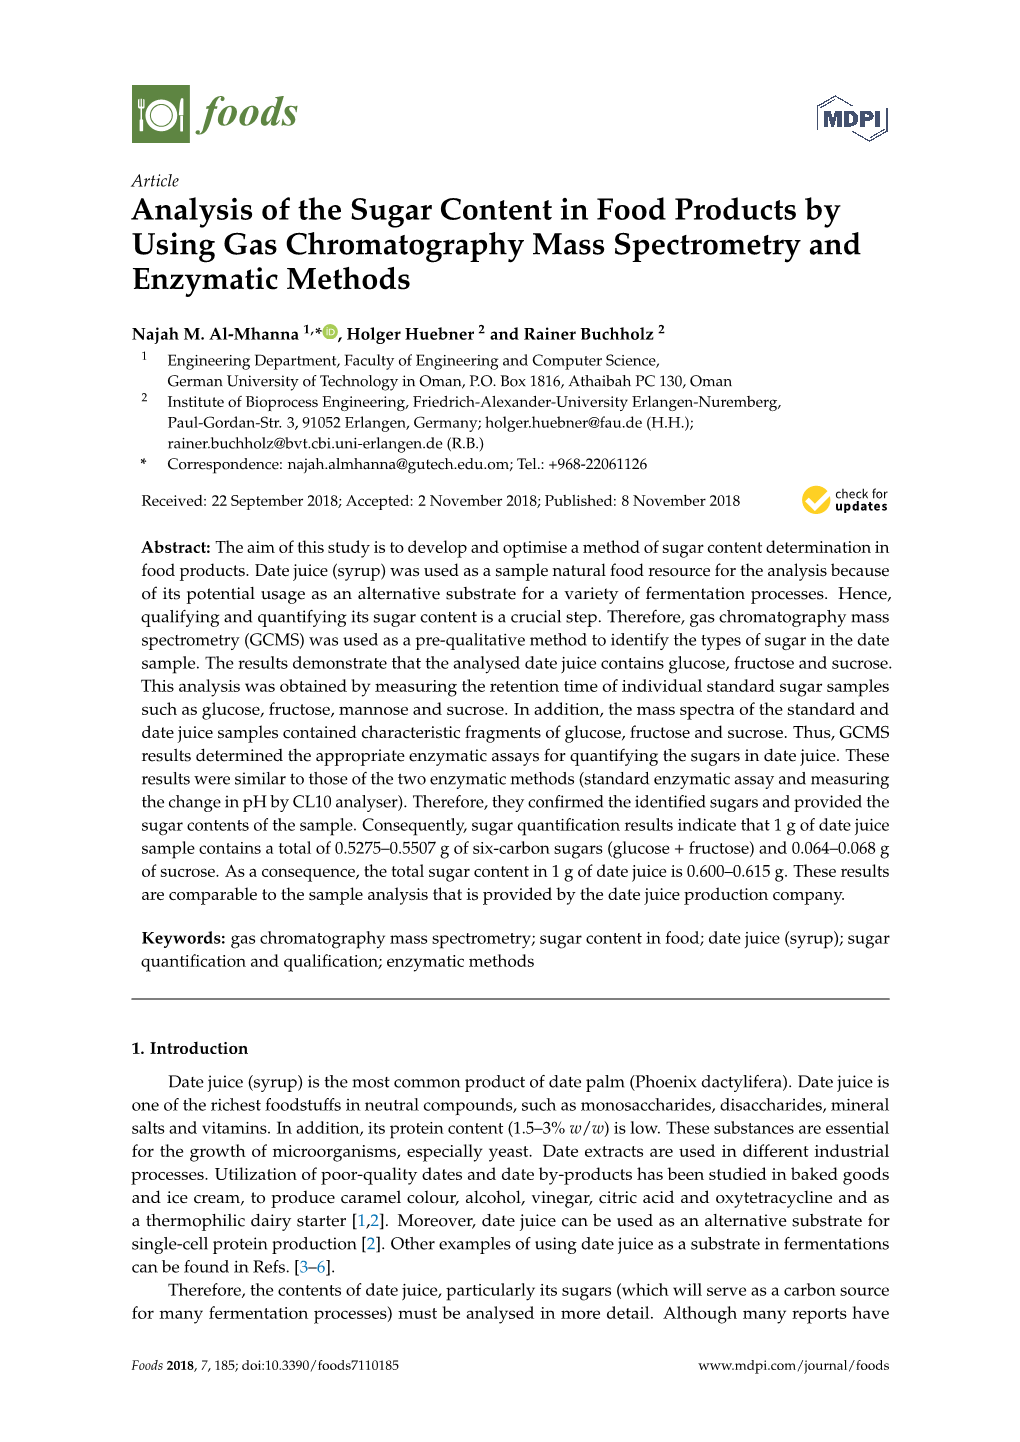 Analysis of the Sugar Content in Food Products by Using Gas Chromatography Mass Spectrometry and Enzymatic Methods